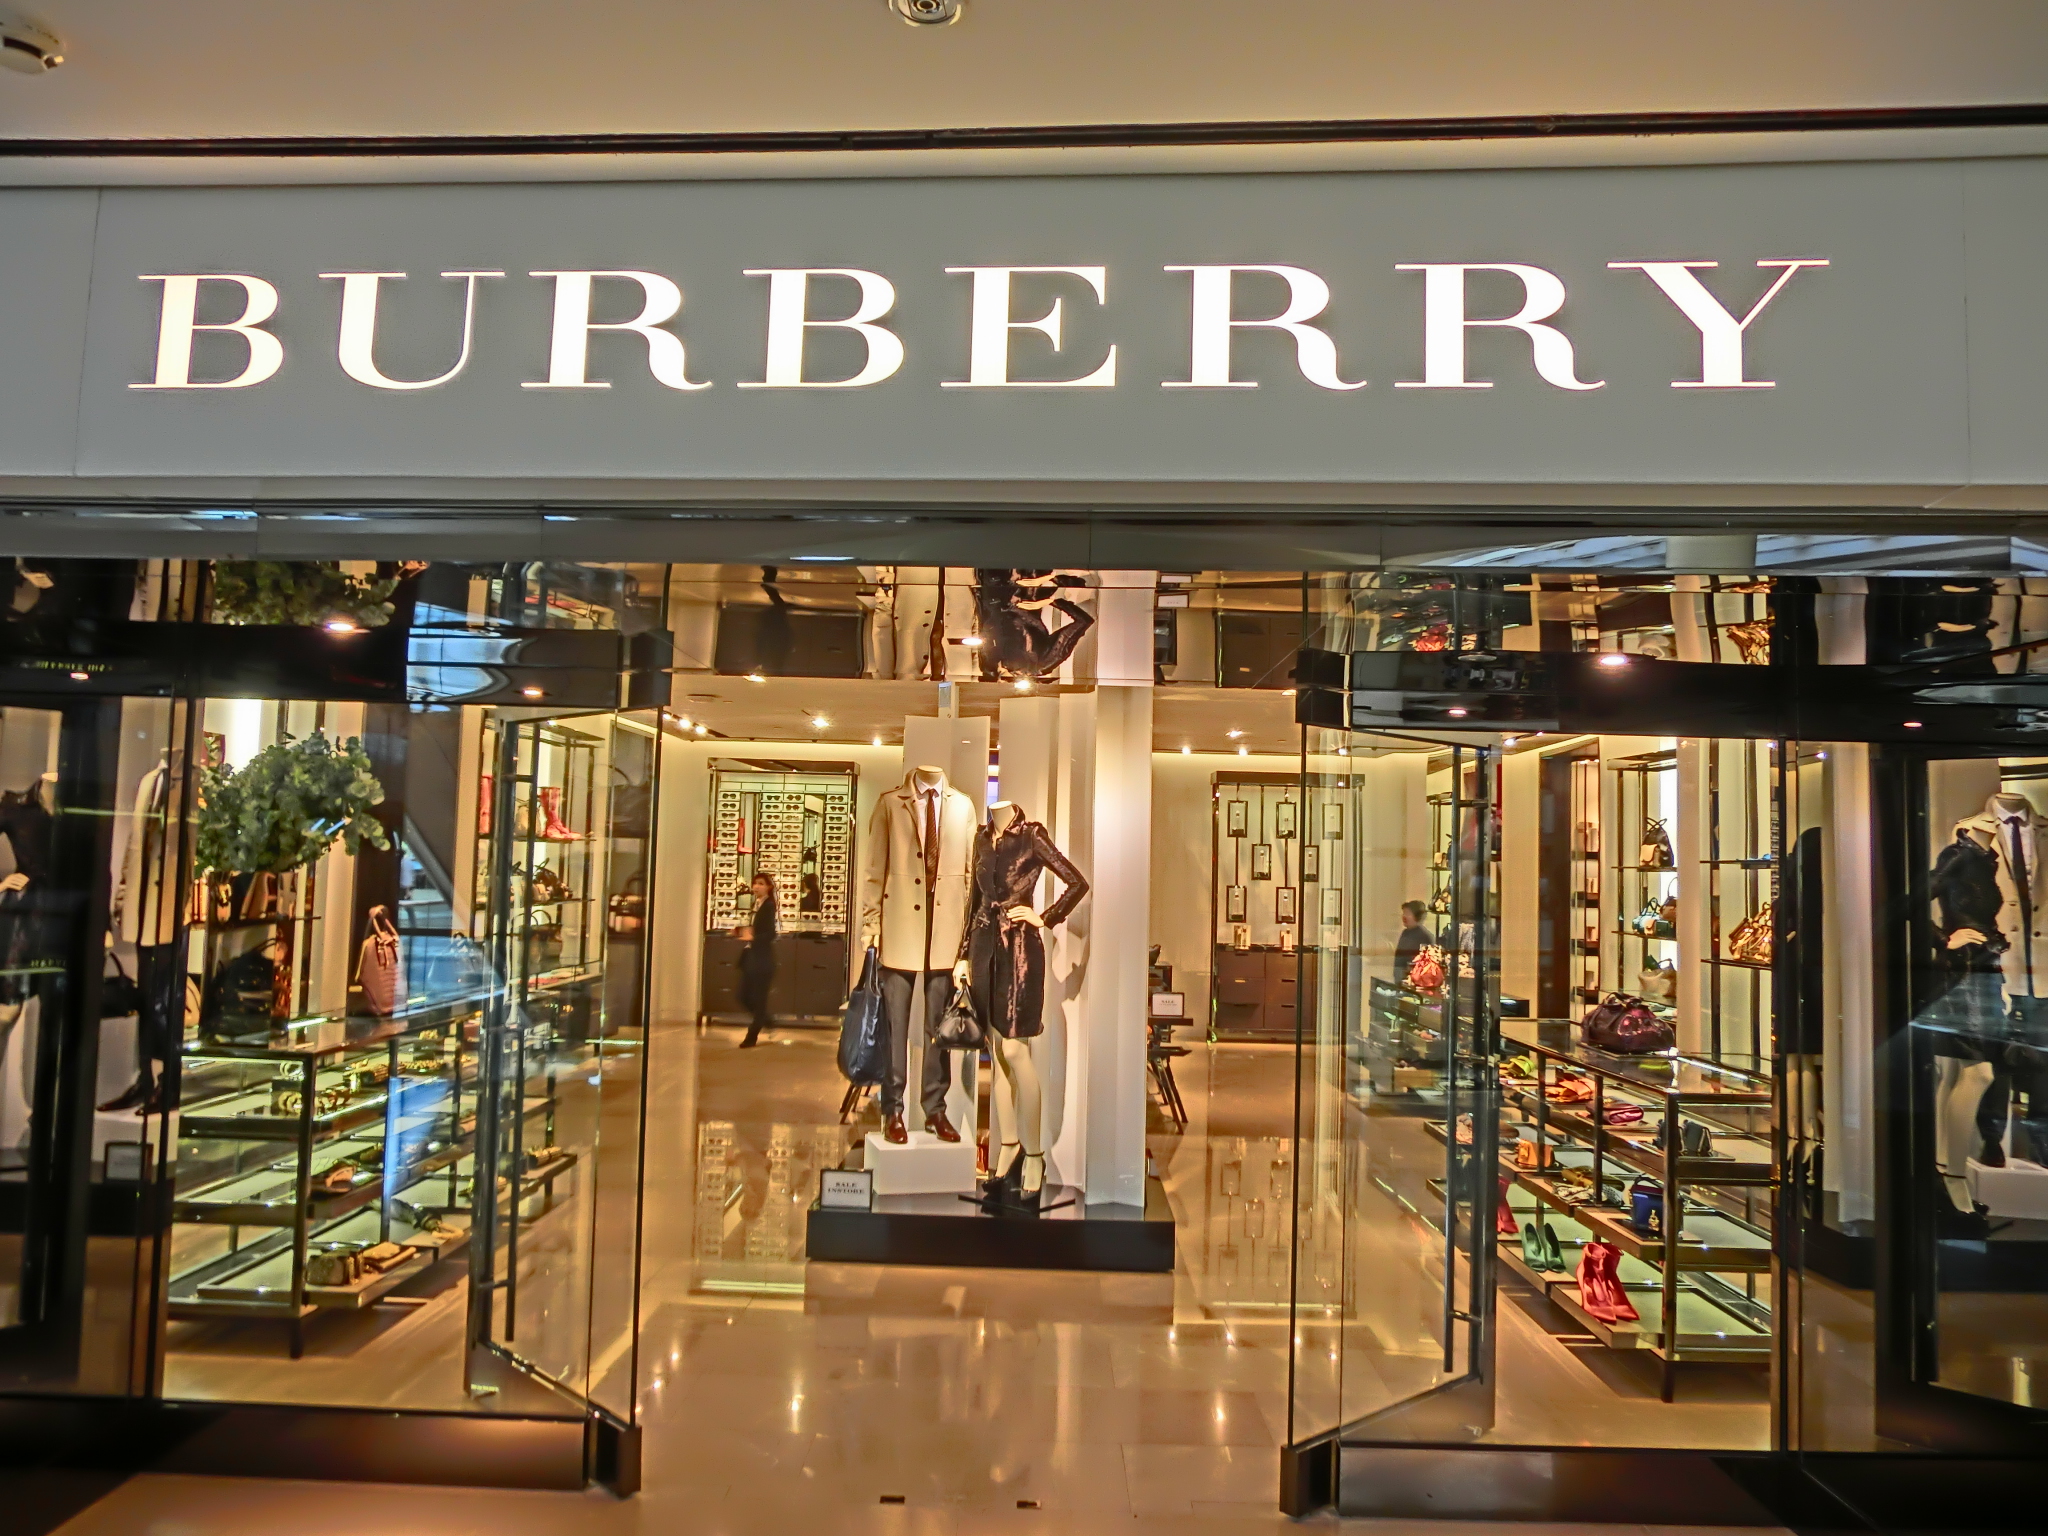 Burberry: A Brand New Logo and font for the Iconic Brand